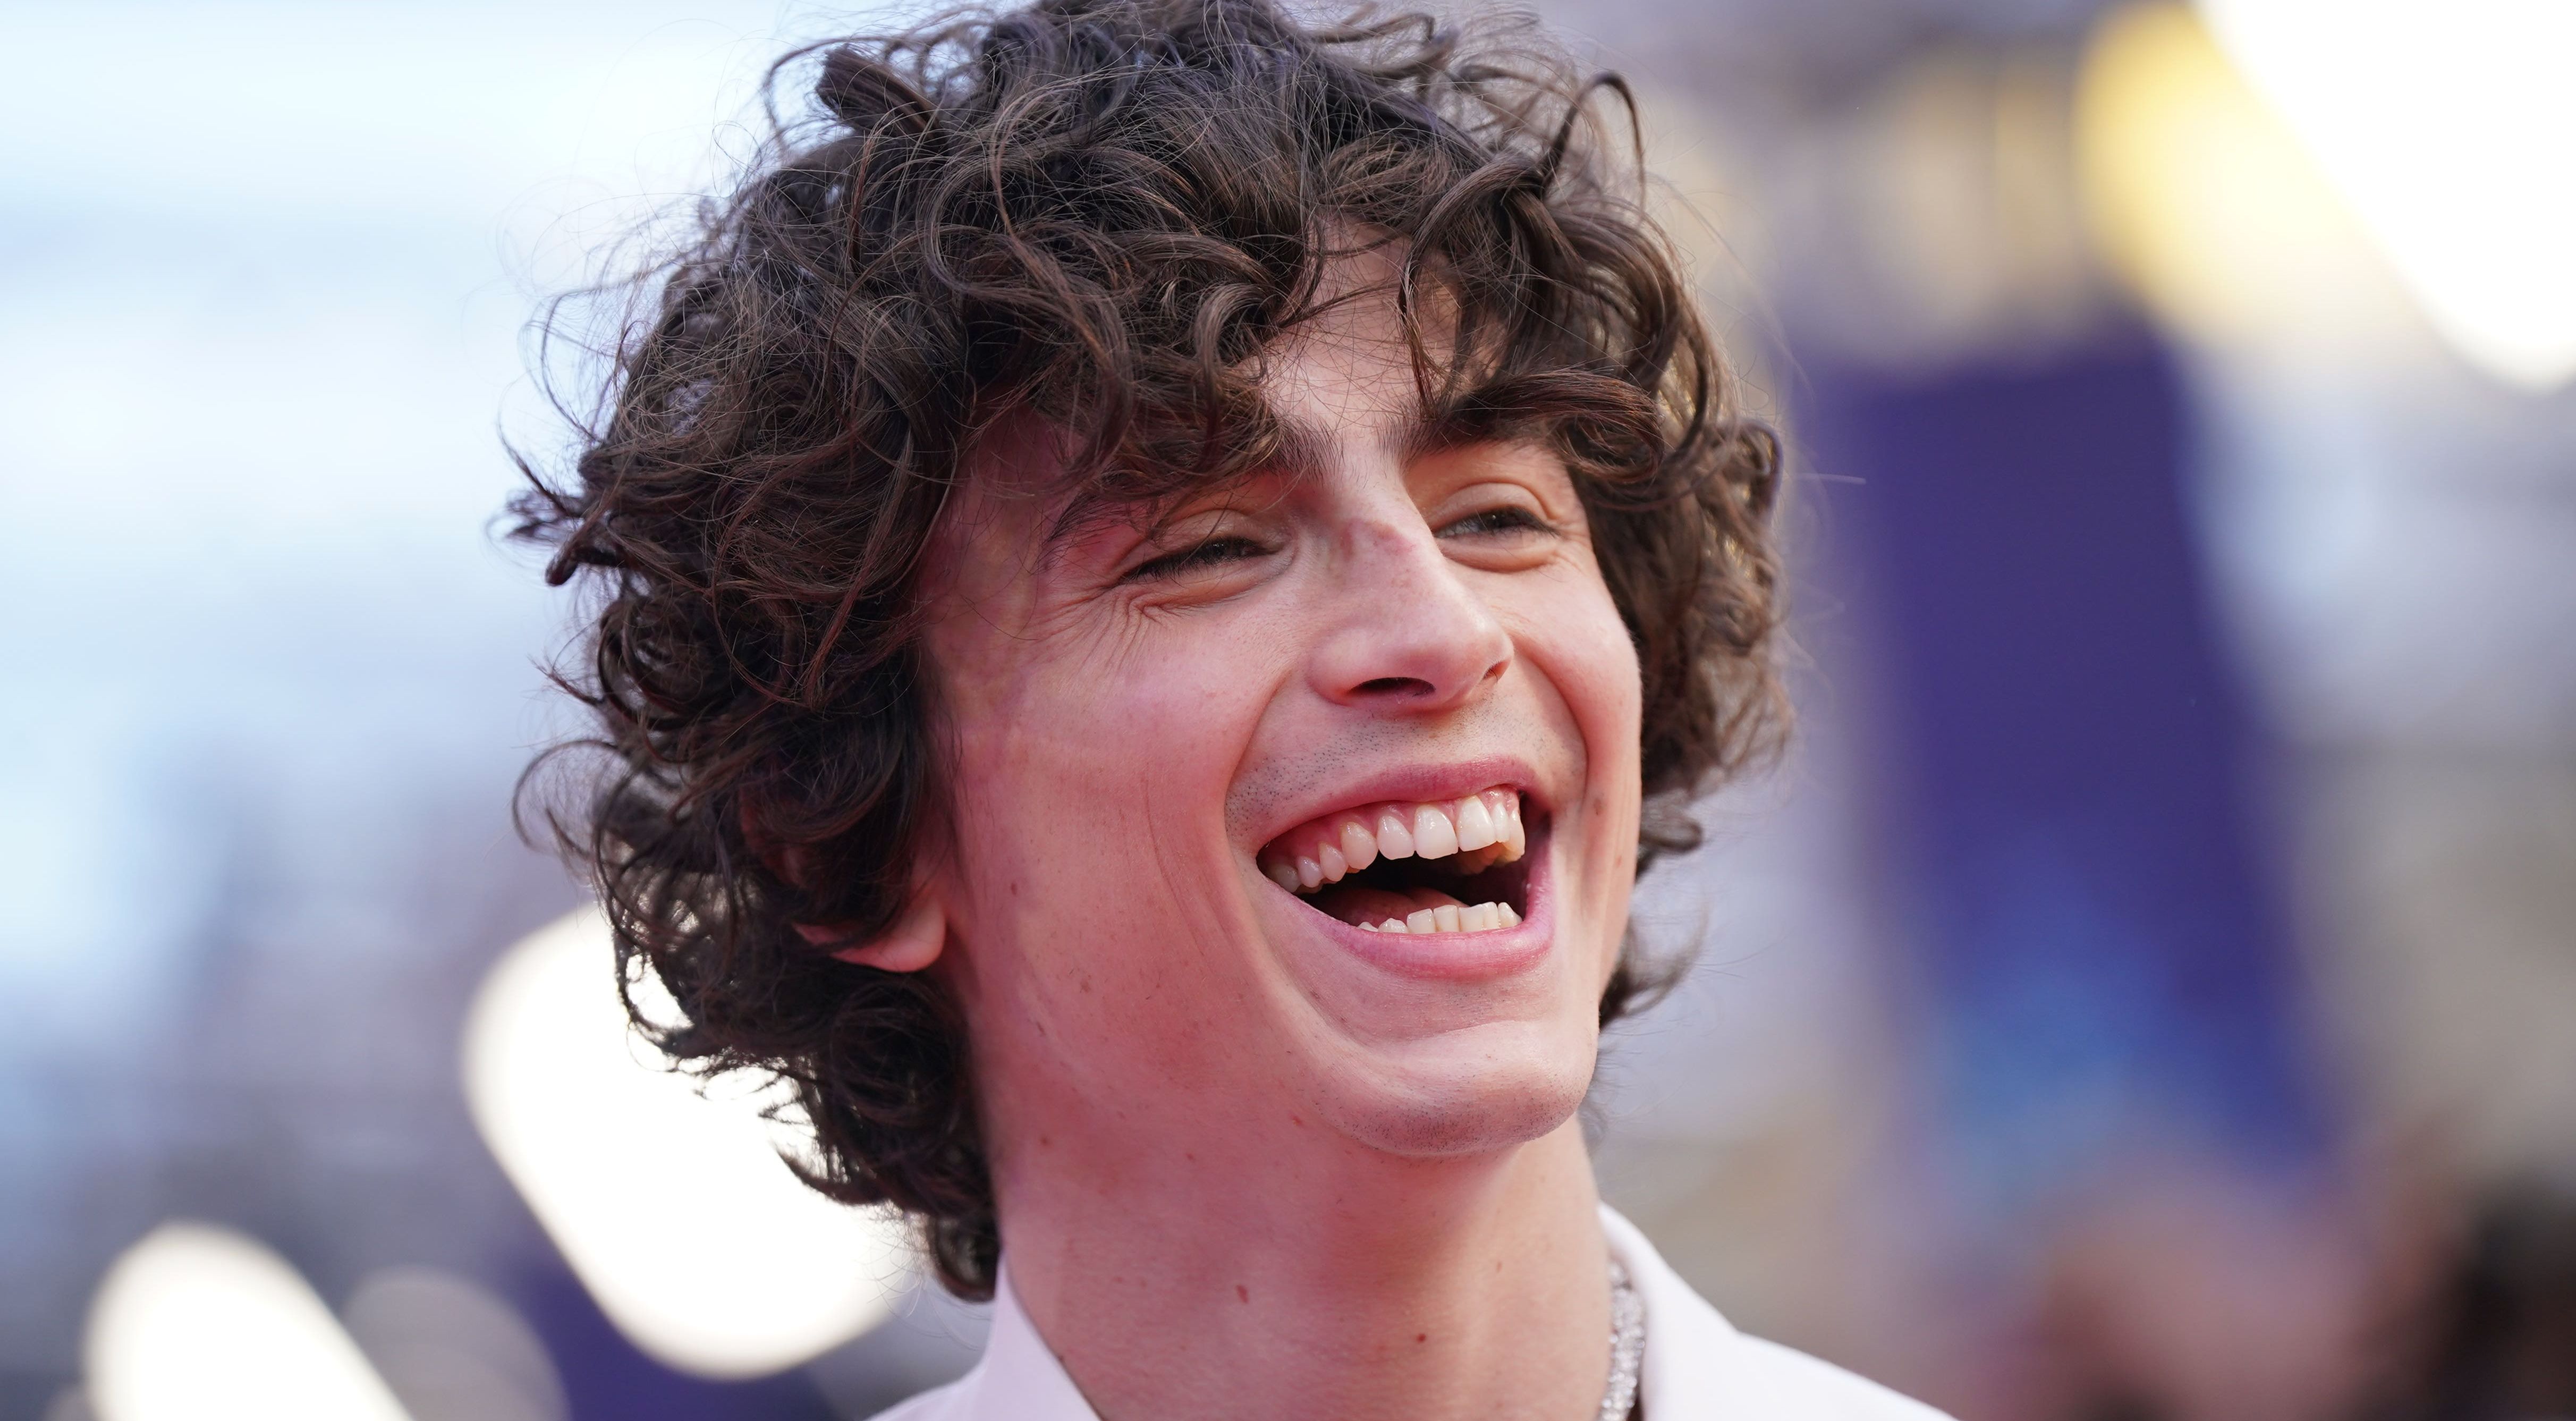 Bones and All' Director: Timothée Chalamet First Choice for Lead Role